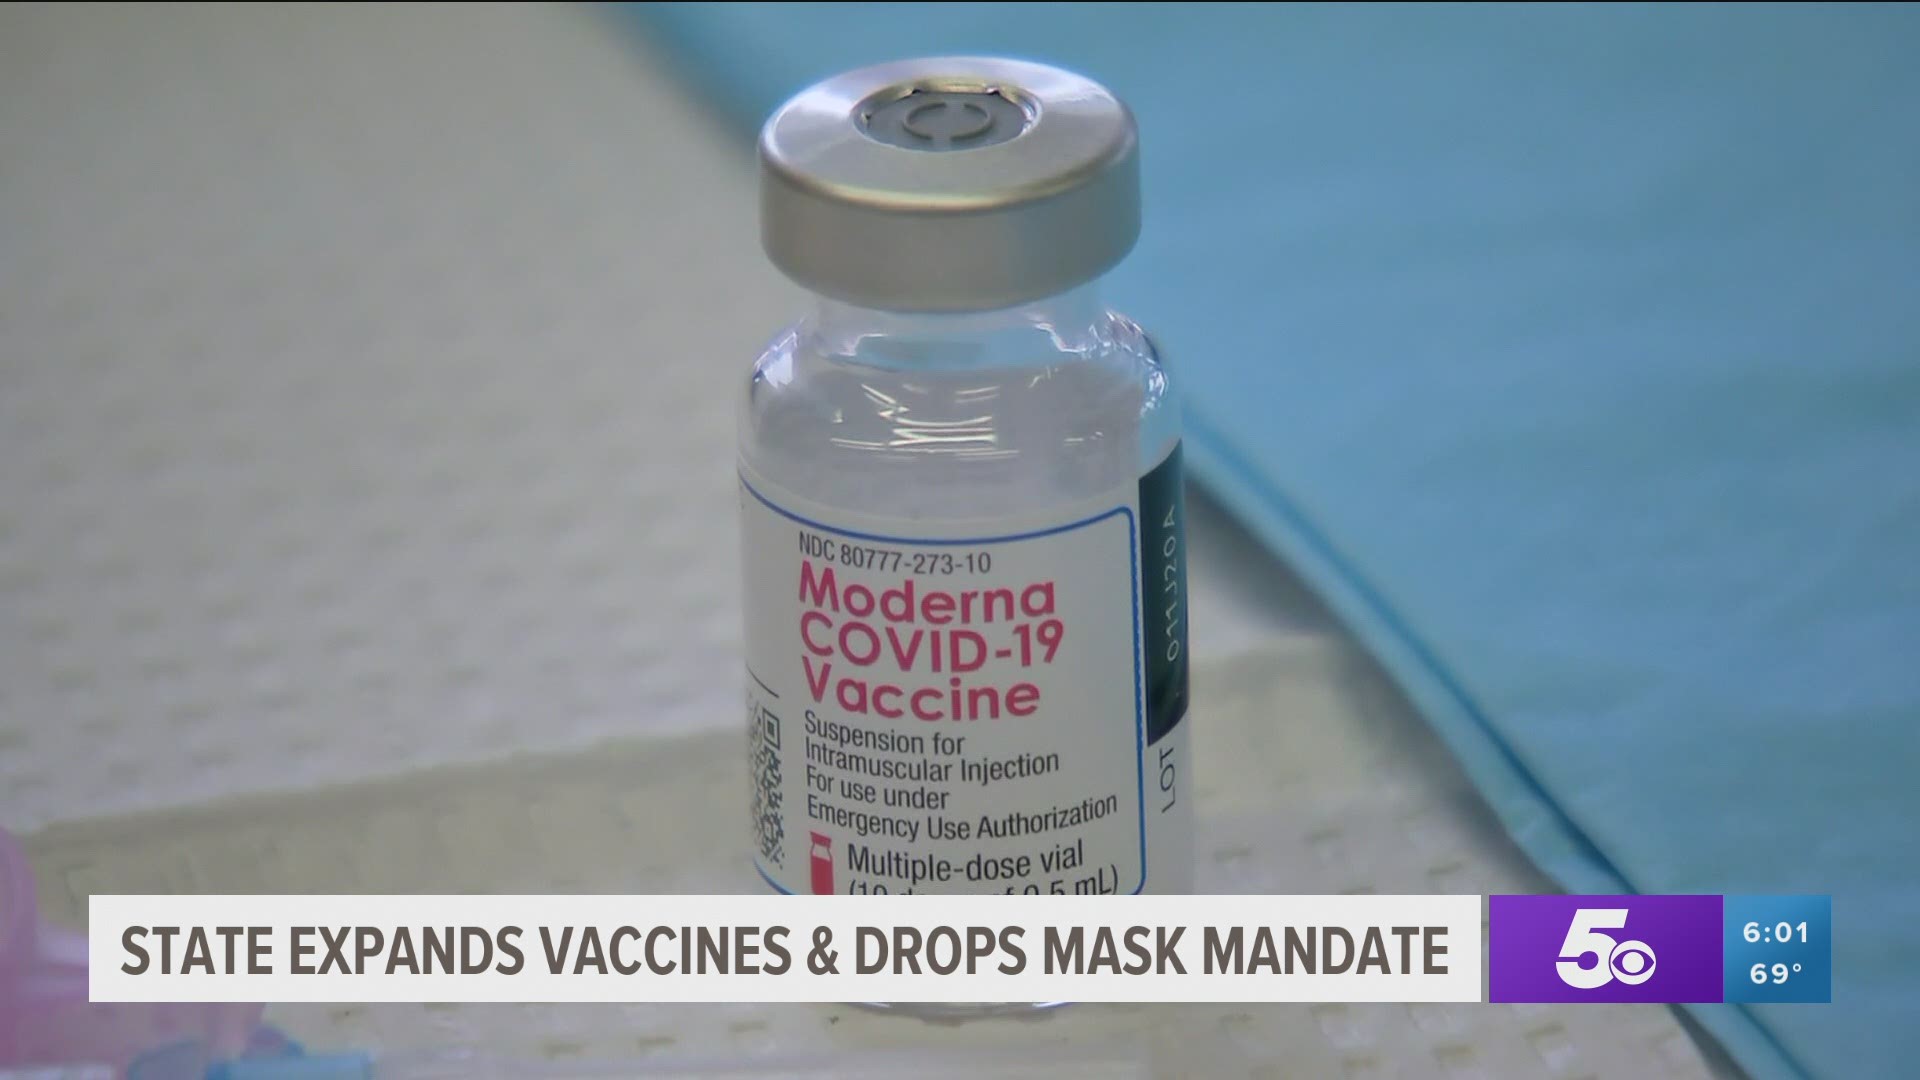 Gov. Asa Hutchinson has ended the statewide mask mandate in Arkansas, those 16+ are now eligible to receive the Covid-19 vaccine.